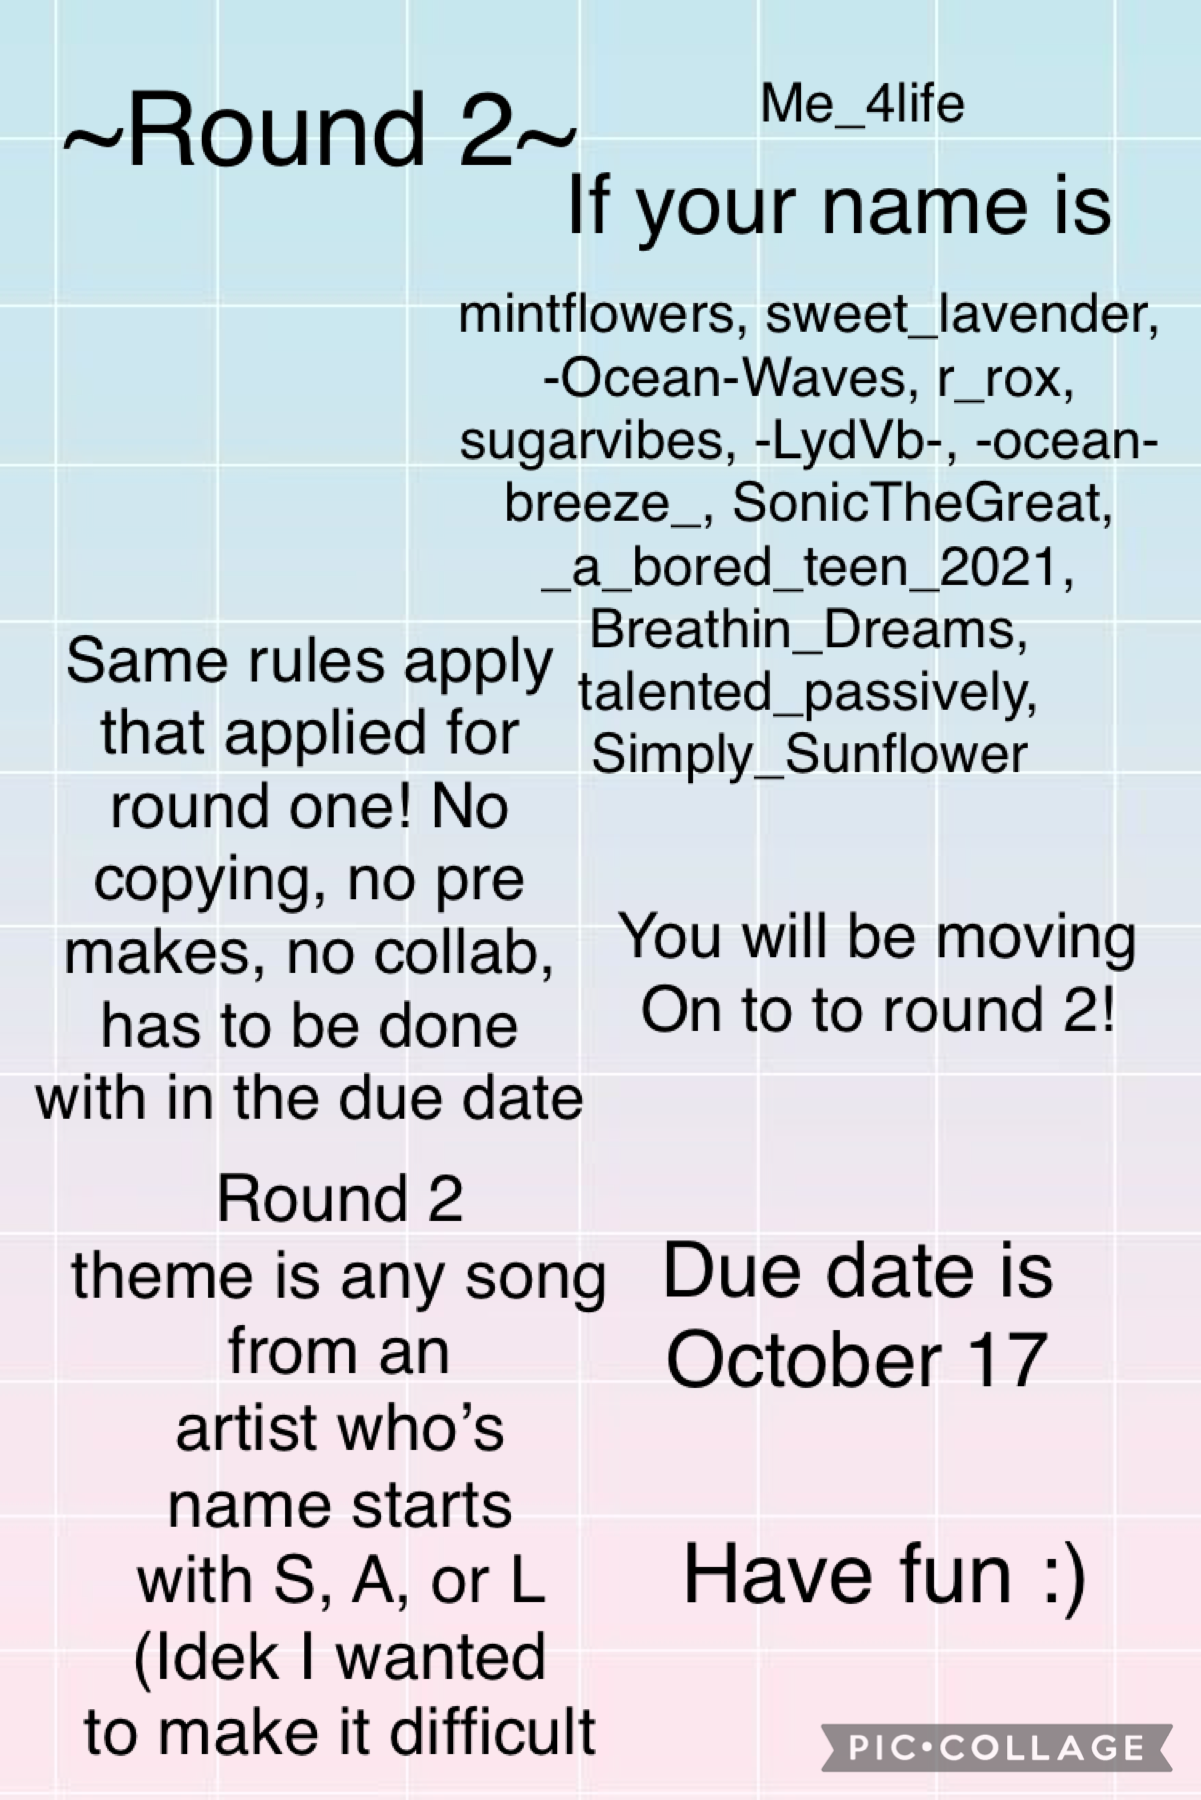 Round 2! If you have any questions, don’t be afraid to ask :)